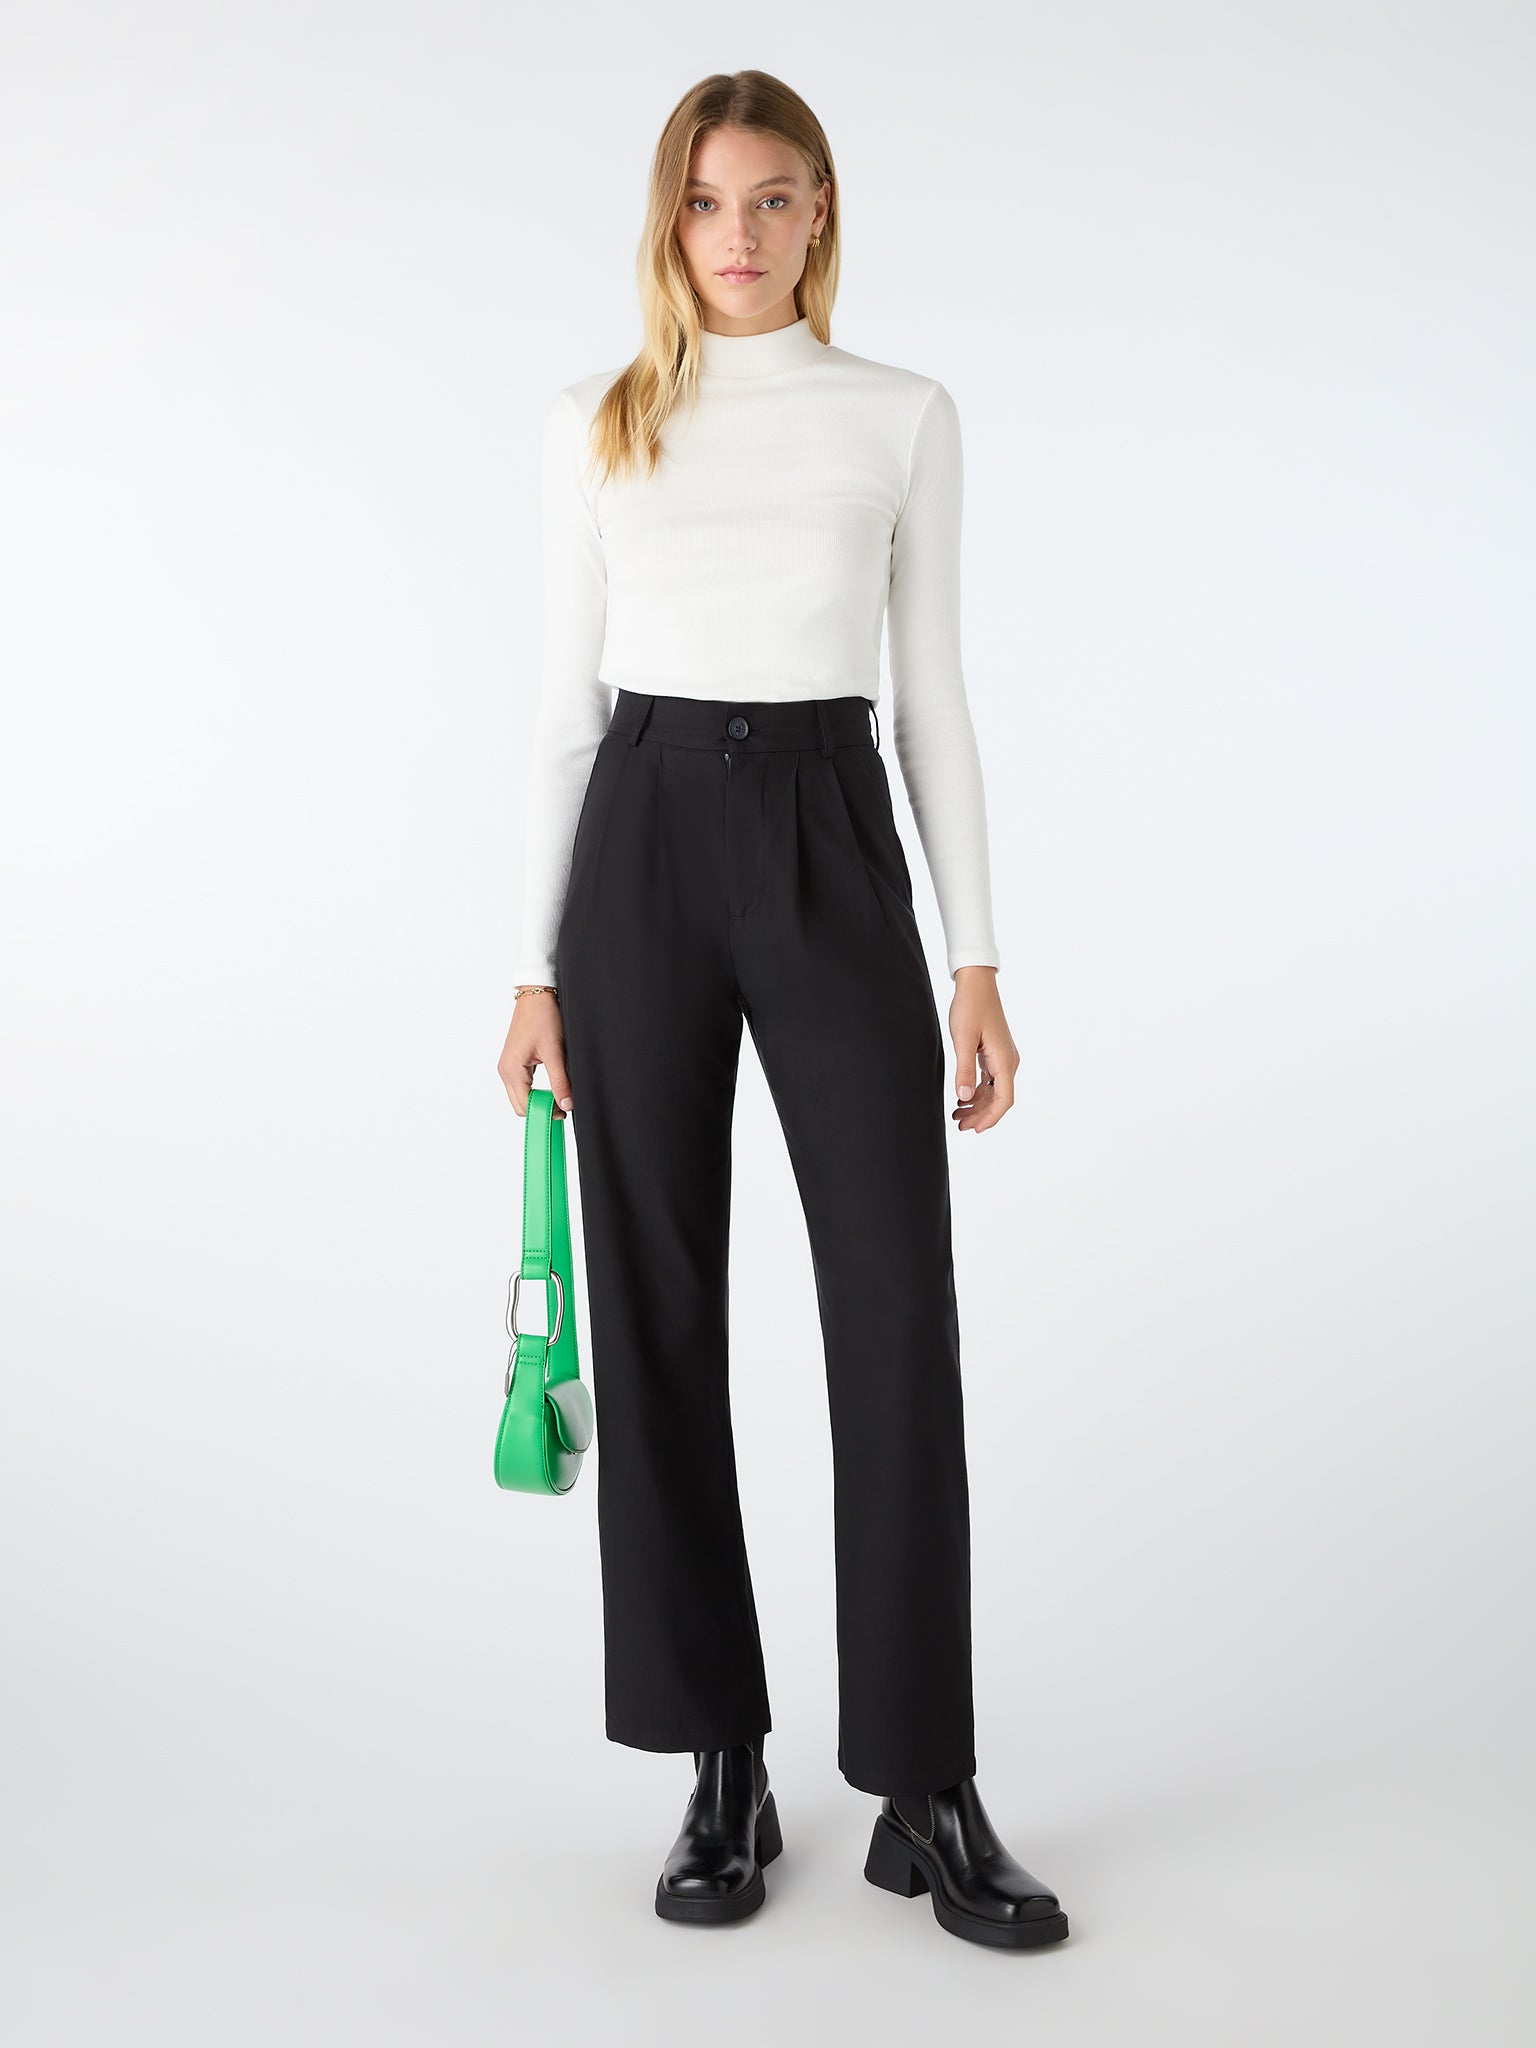 Cinnamon Relaxed Trousers in Black | OMNES | Trousers | Sustainable ...